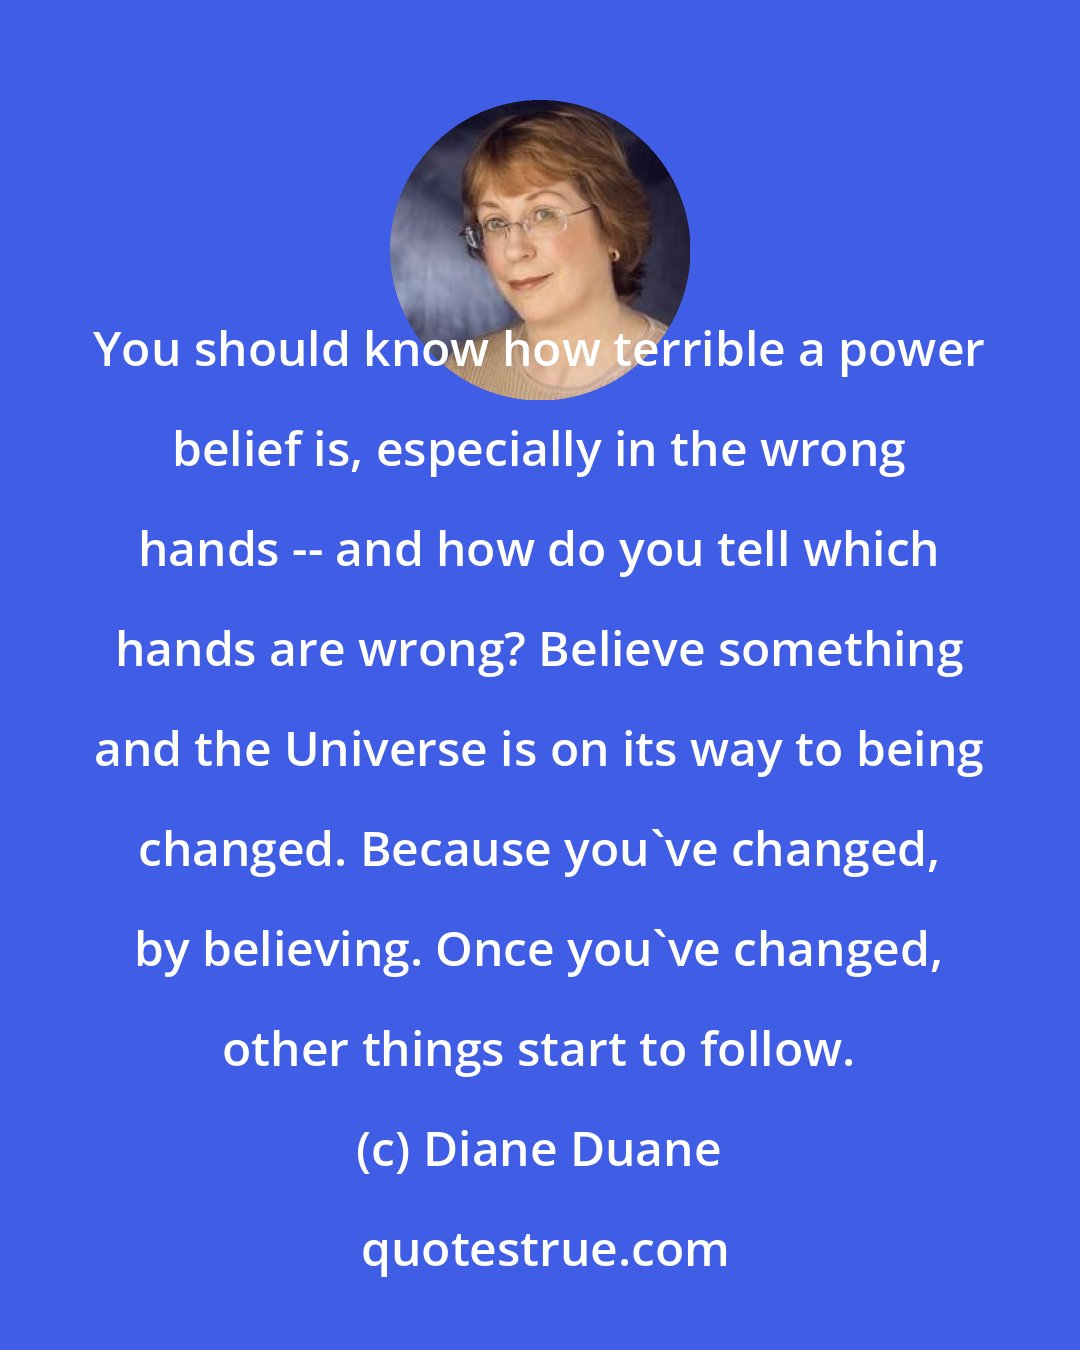 Diane Duane: You should know how terrible a power belief is, especially in the wrong hands -- and how do you tell which hands are wrong? Believe something and the Universe is on its way to being changed. Because you've changed, by believing. Once you've changed, other things start to follow.